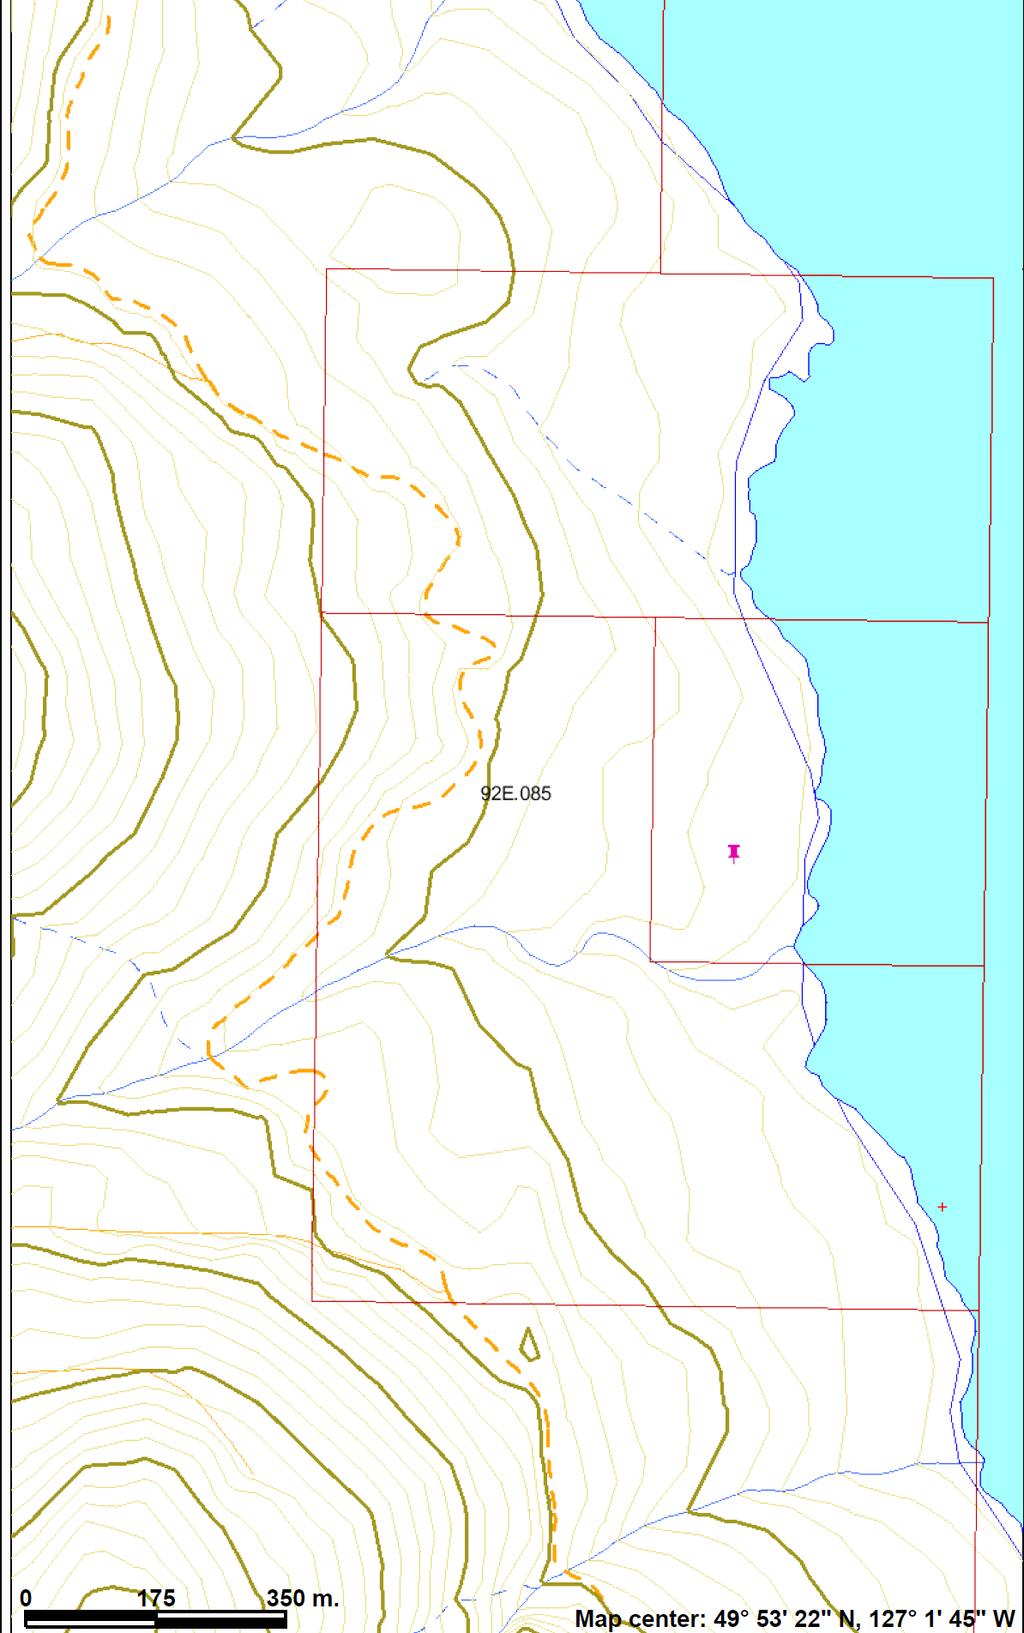 0.0025 1:10 000 Map Showing values in ppm gold and claim boundaries based on Mineral Titles Online Claim Map